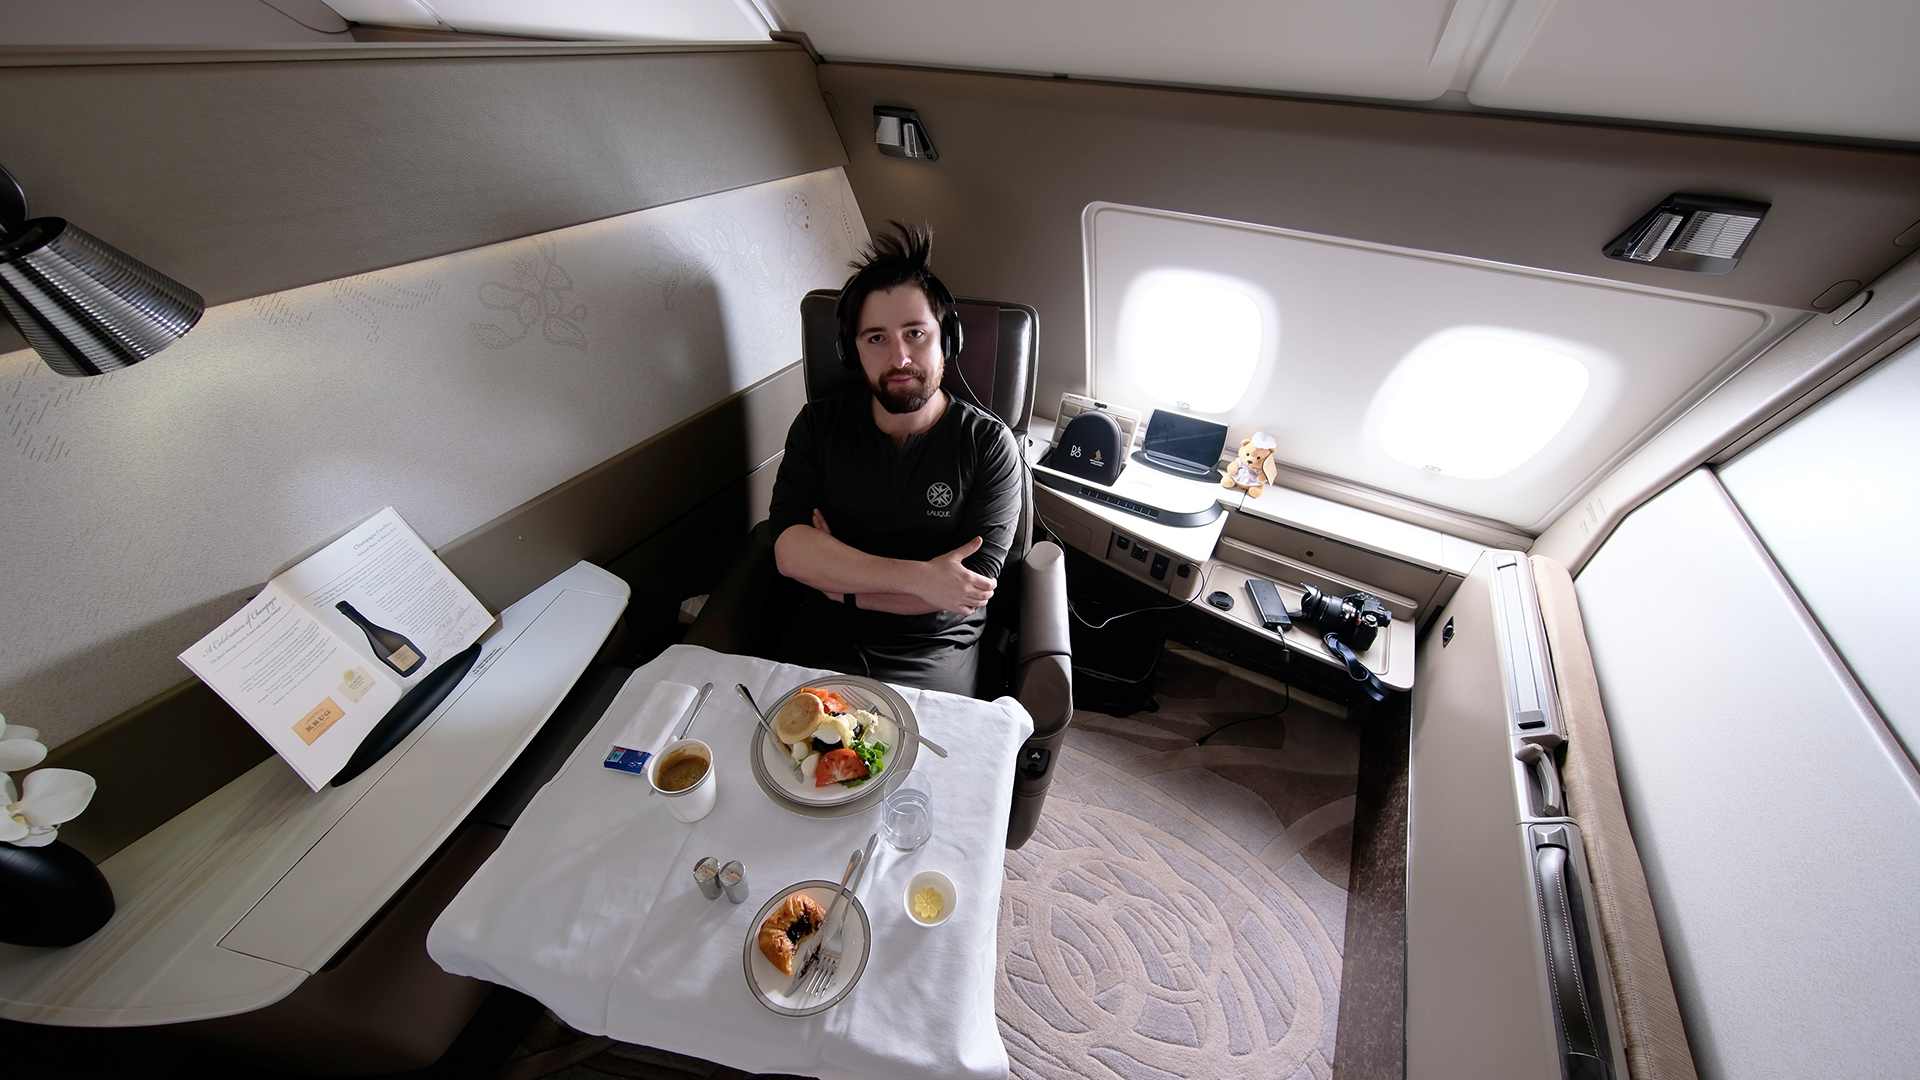 Singapore Airlines First Class Suites and pyjamas